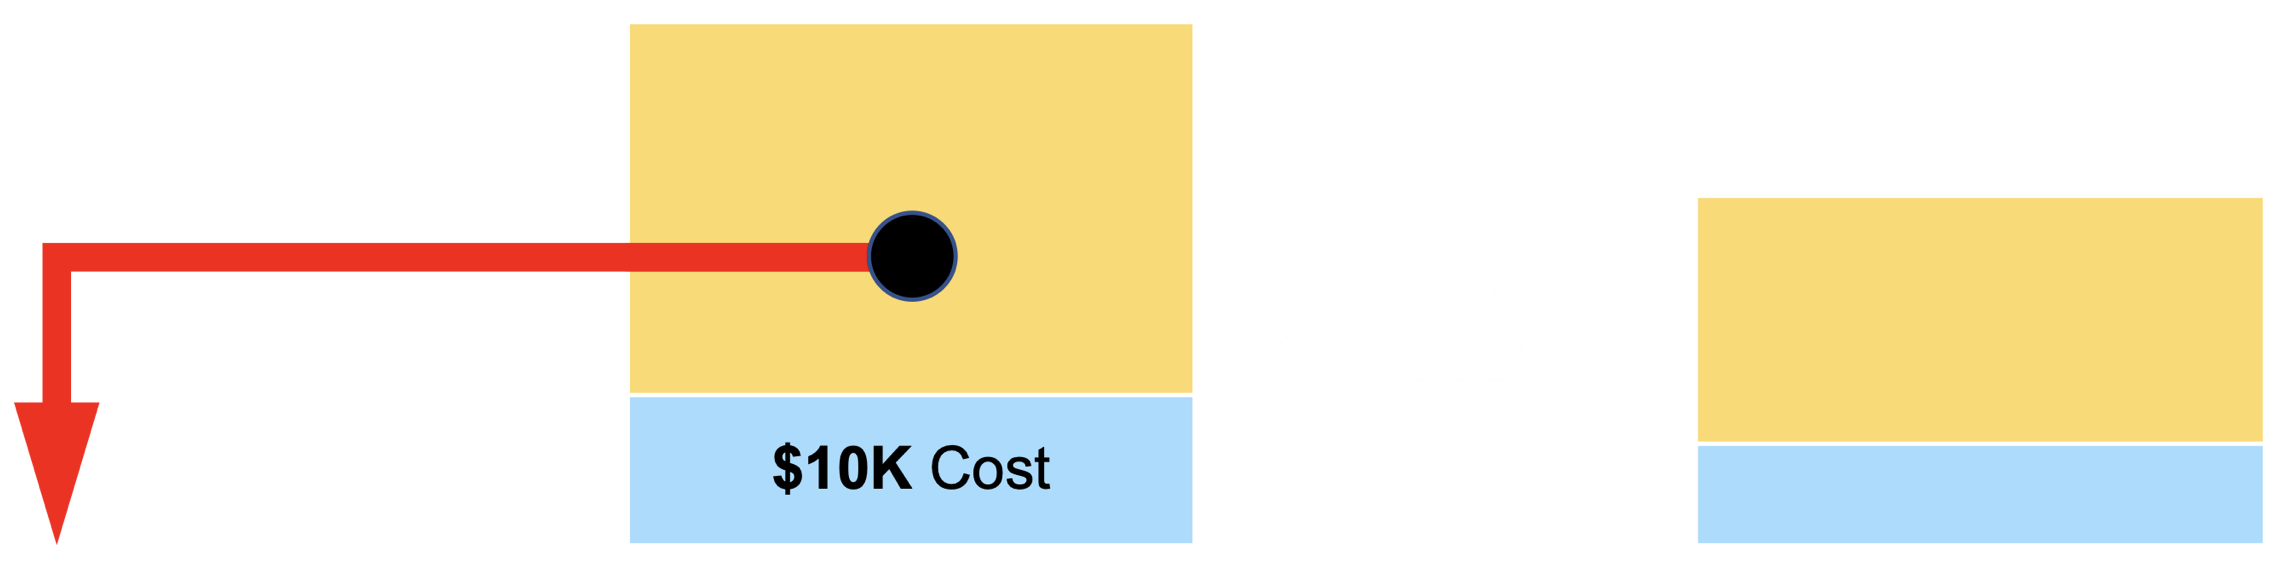 cms_effect_on_cost